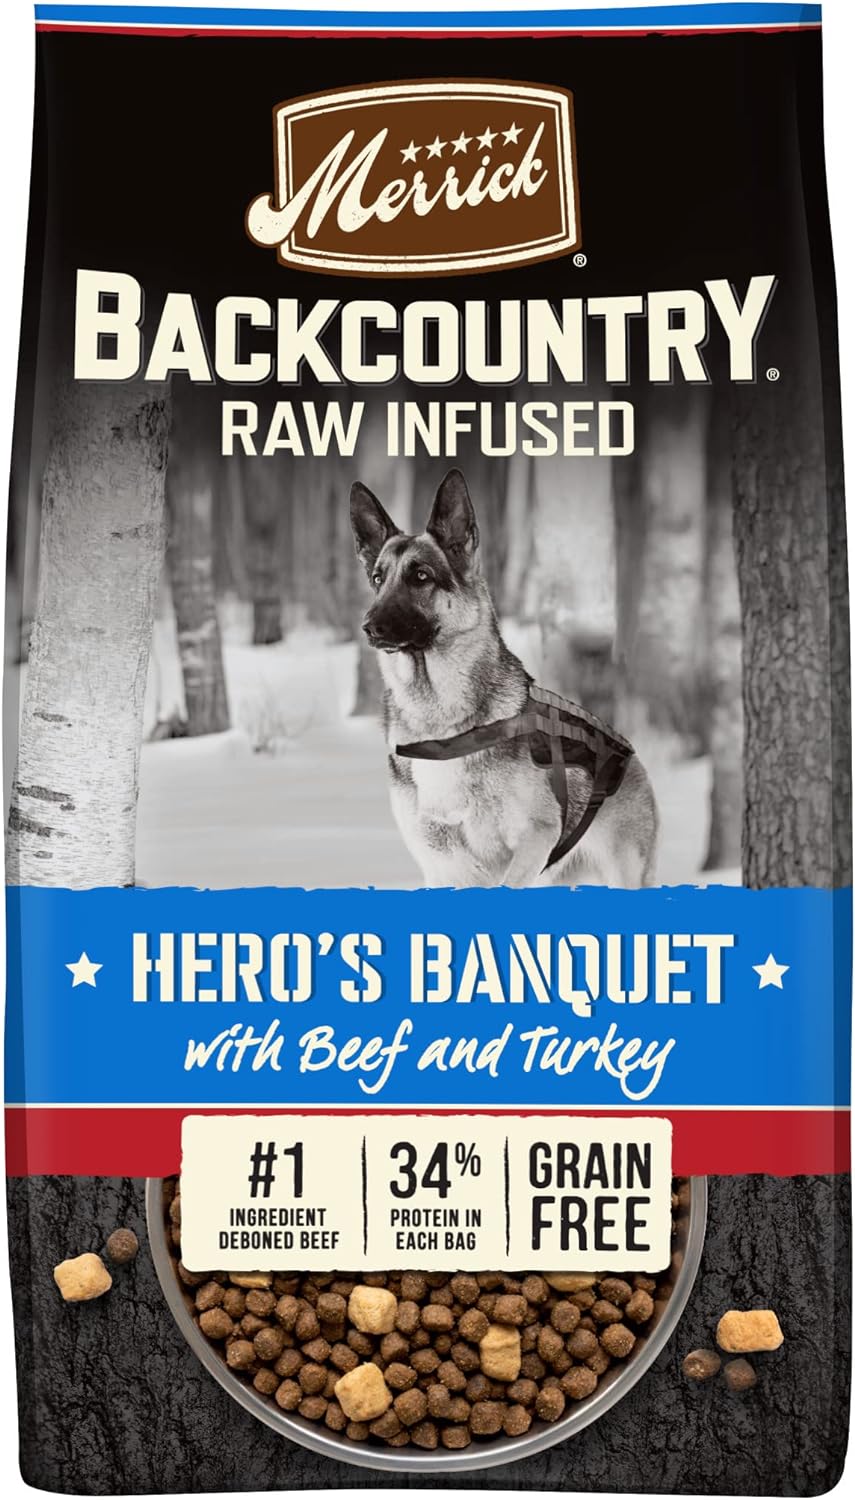 Merrick Backcountry Grain Free Dry Adult Dog Food, Kibble With Freeze Dried Raw Pieces, Hero’s Banquet Recipe - 20.0 lb. Bag